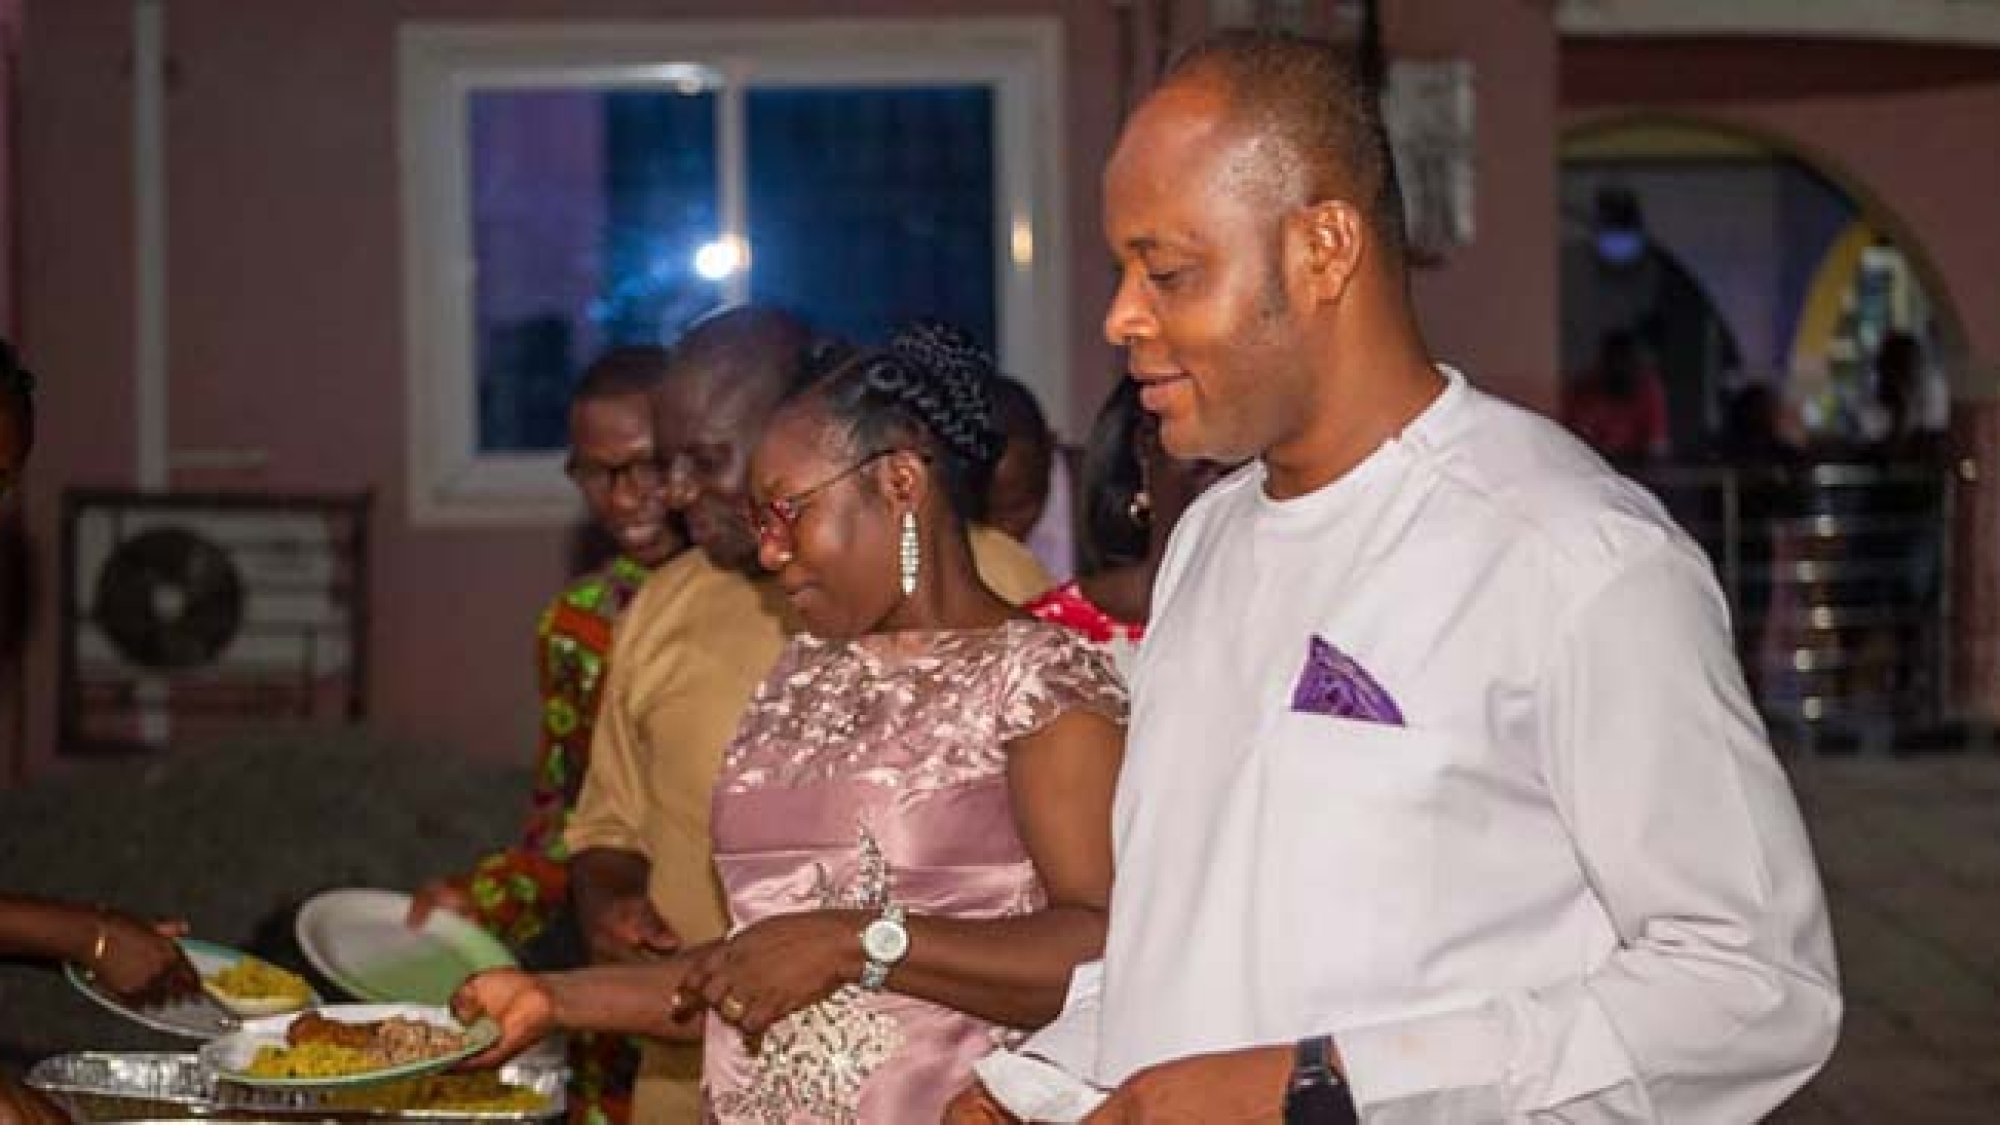 Oduman District Holds Couples' Dinner web